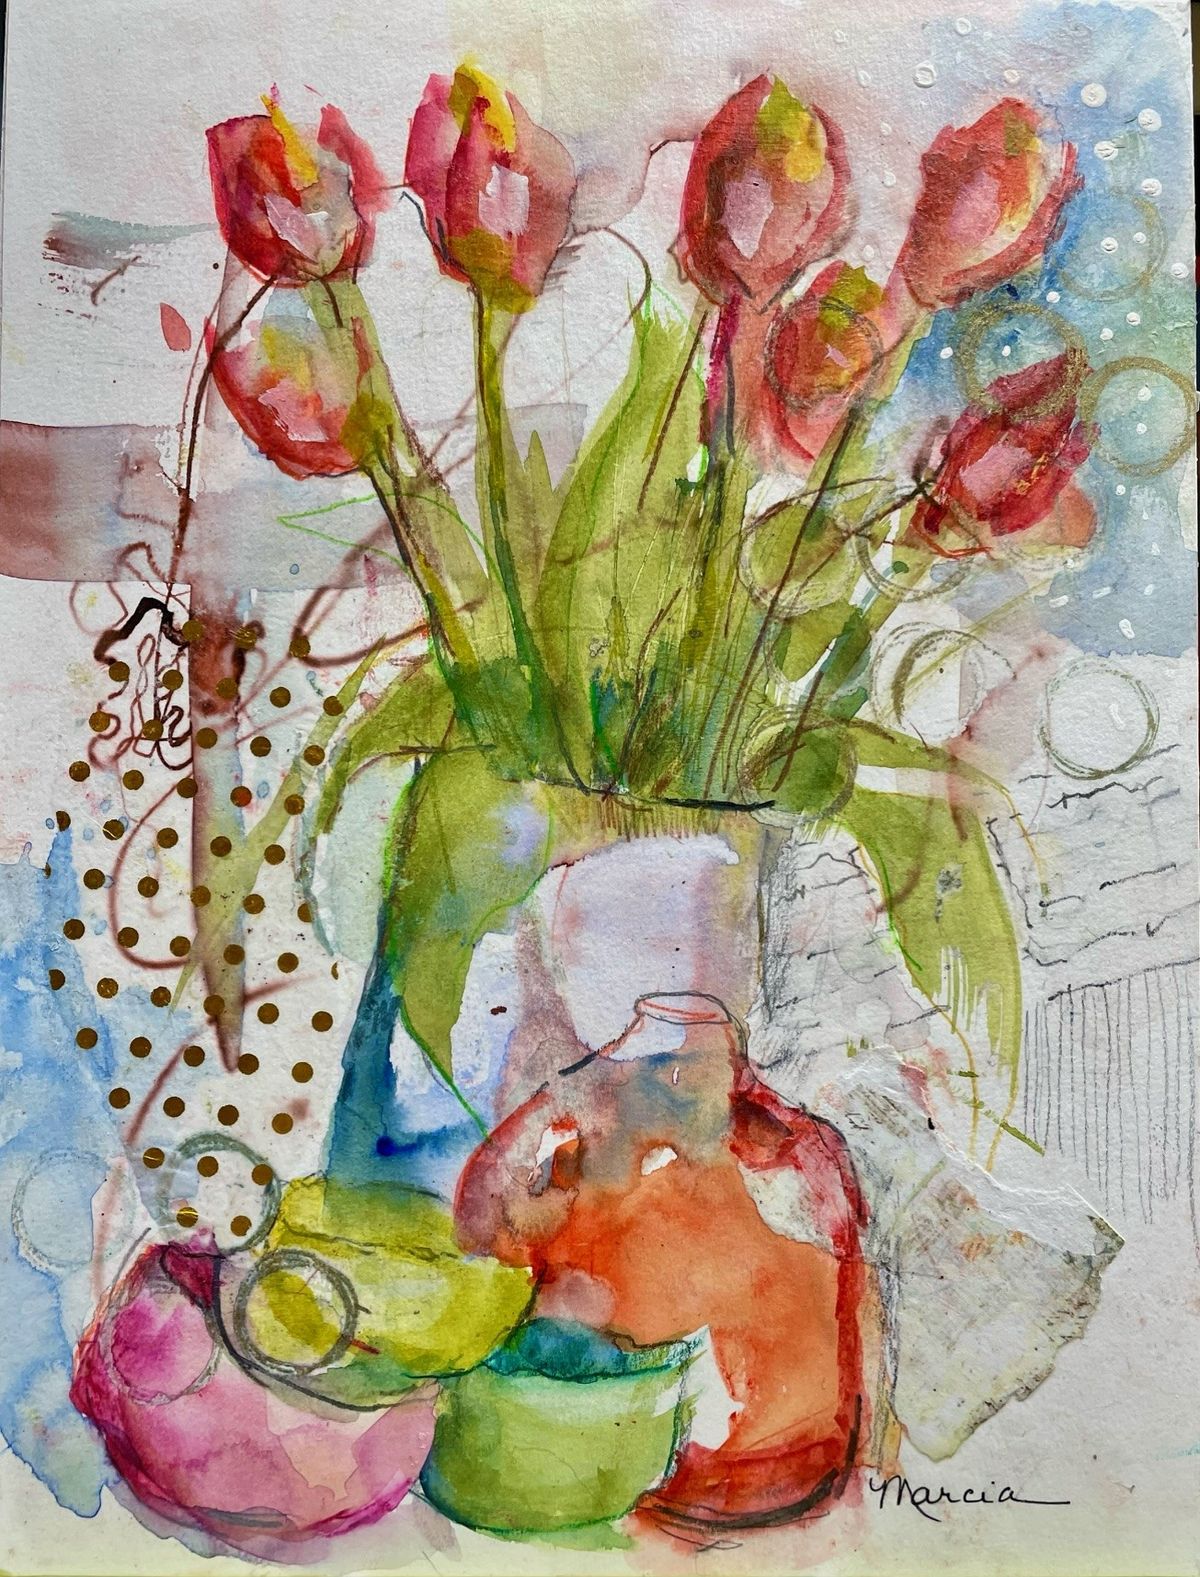 Intuitive Watercolor Florals with Mixed Media with Marcia Hodges